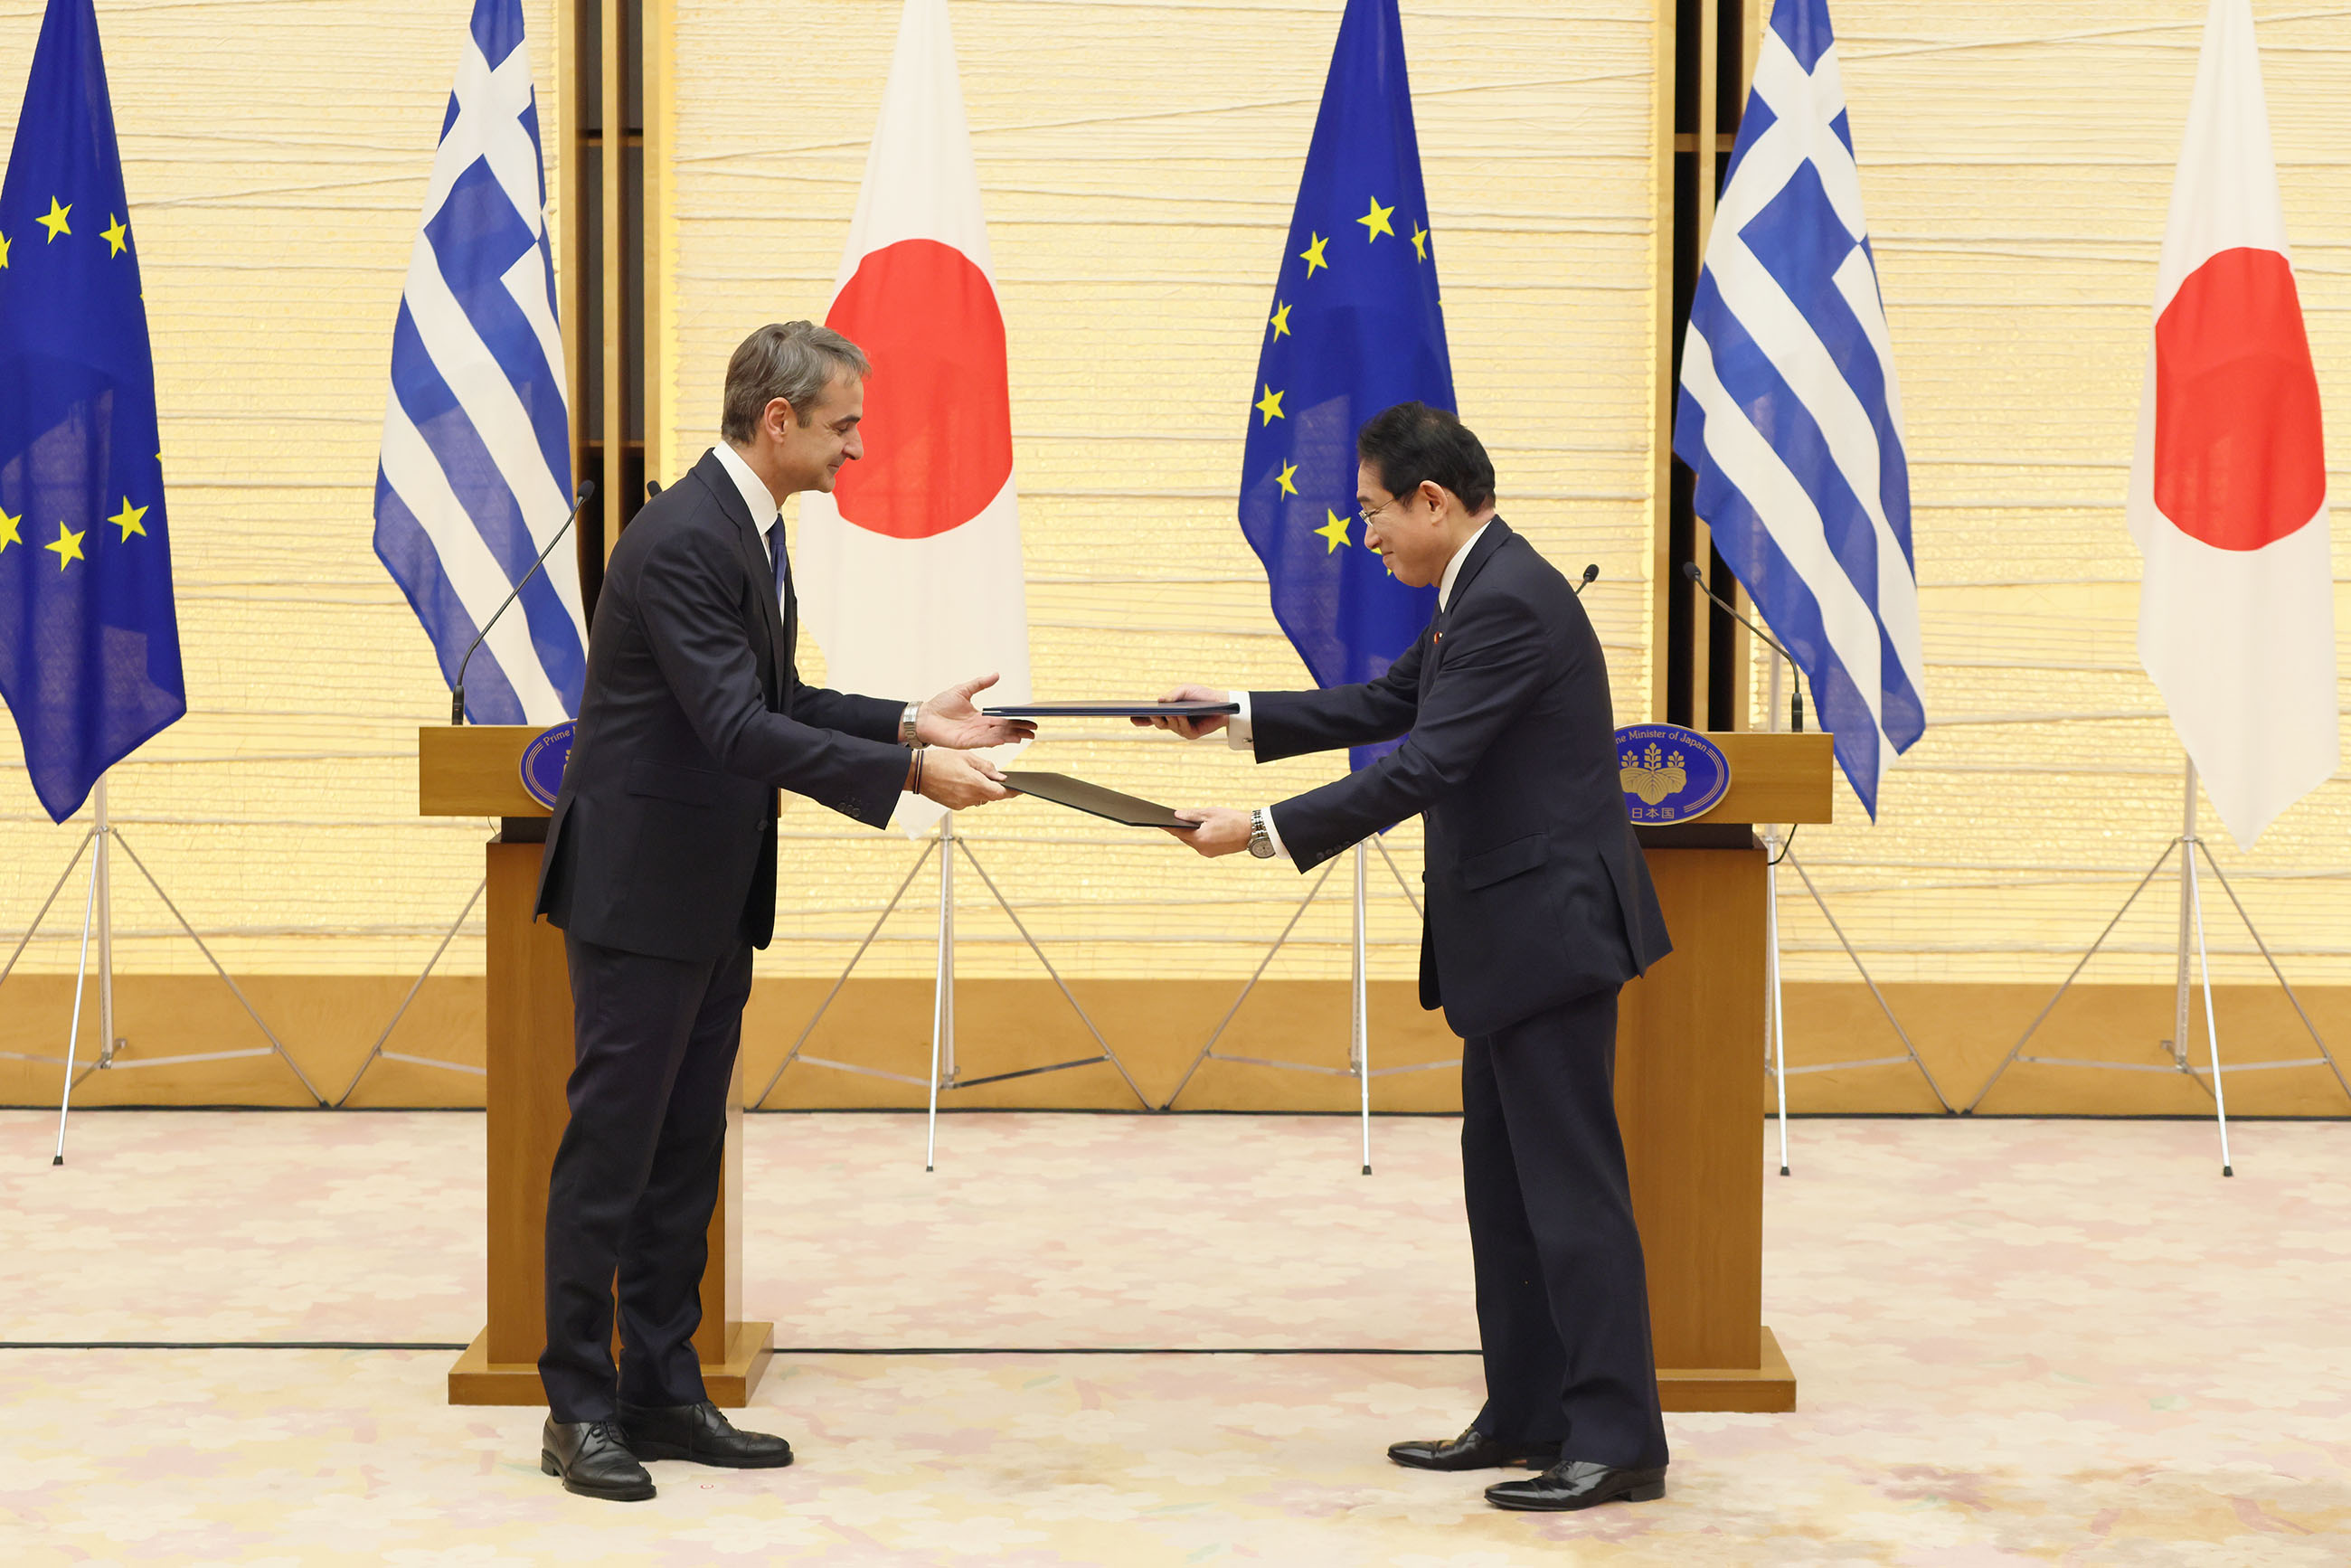 The two leaders exchanging documents (2)